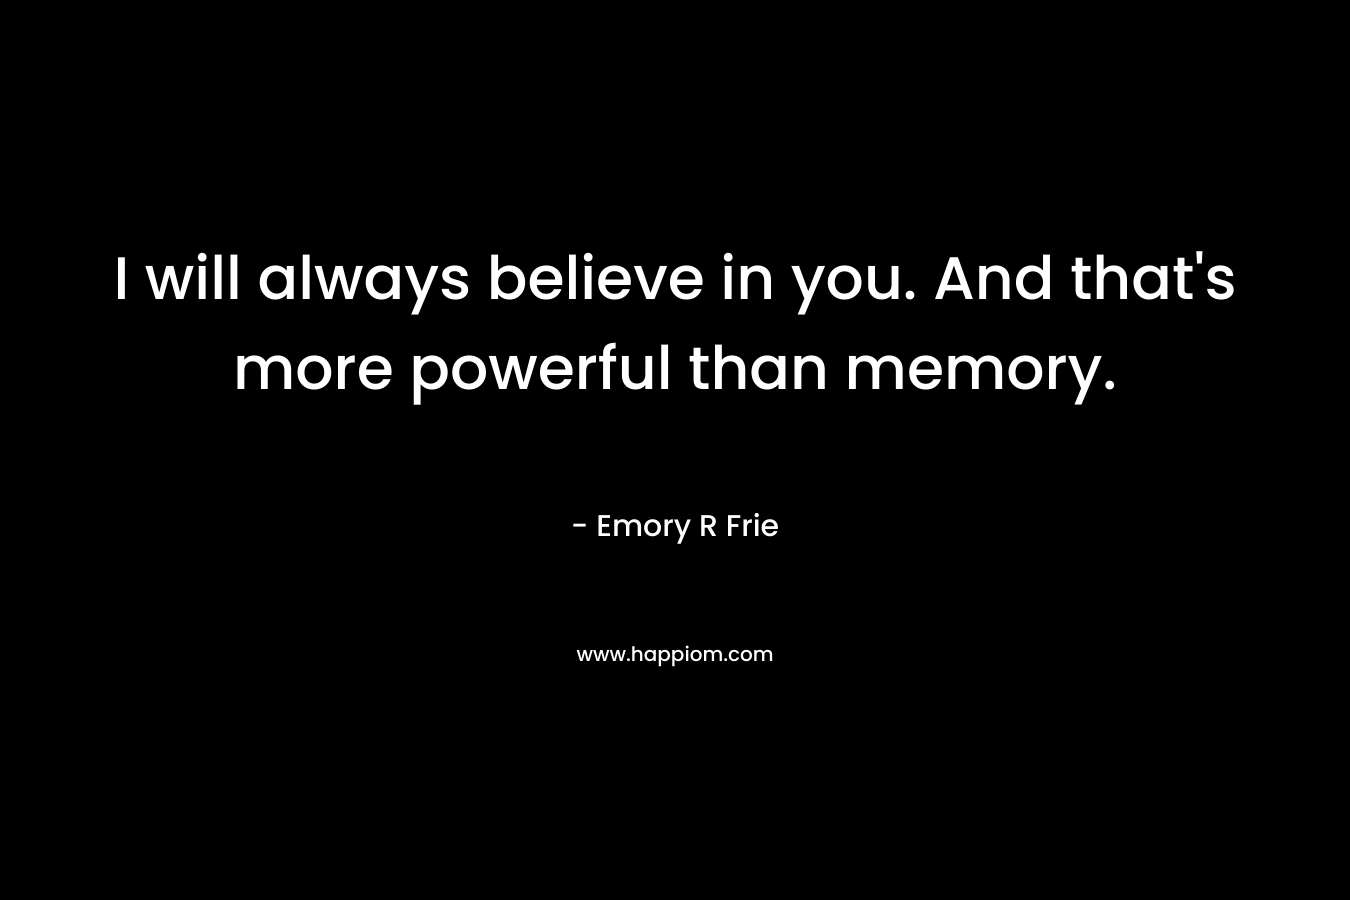 I will always believe in you. And that's more powerful than memory.